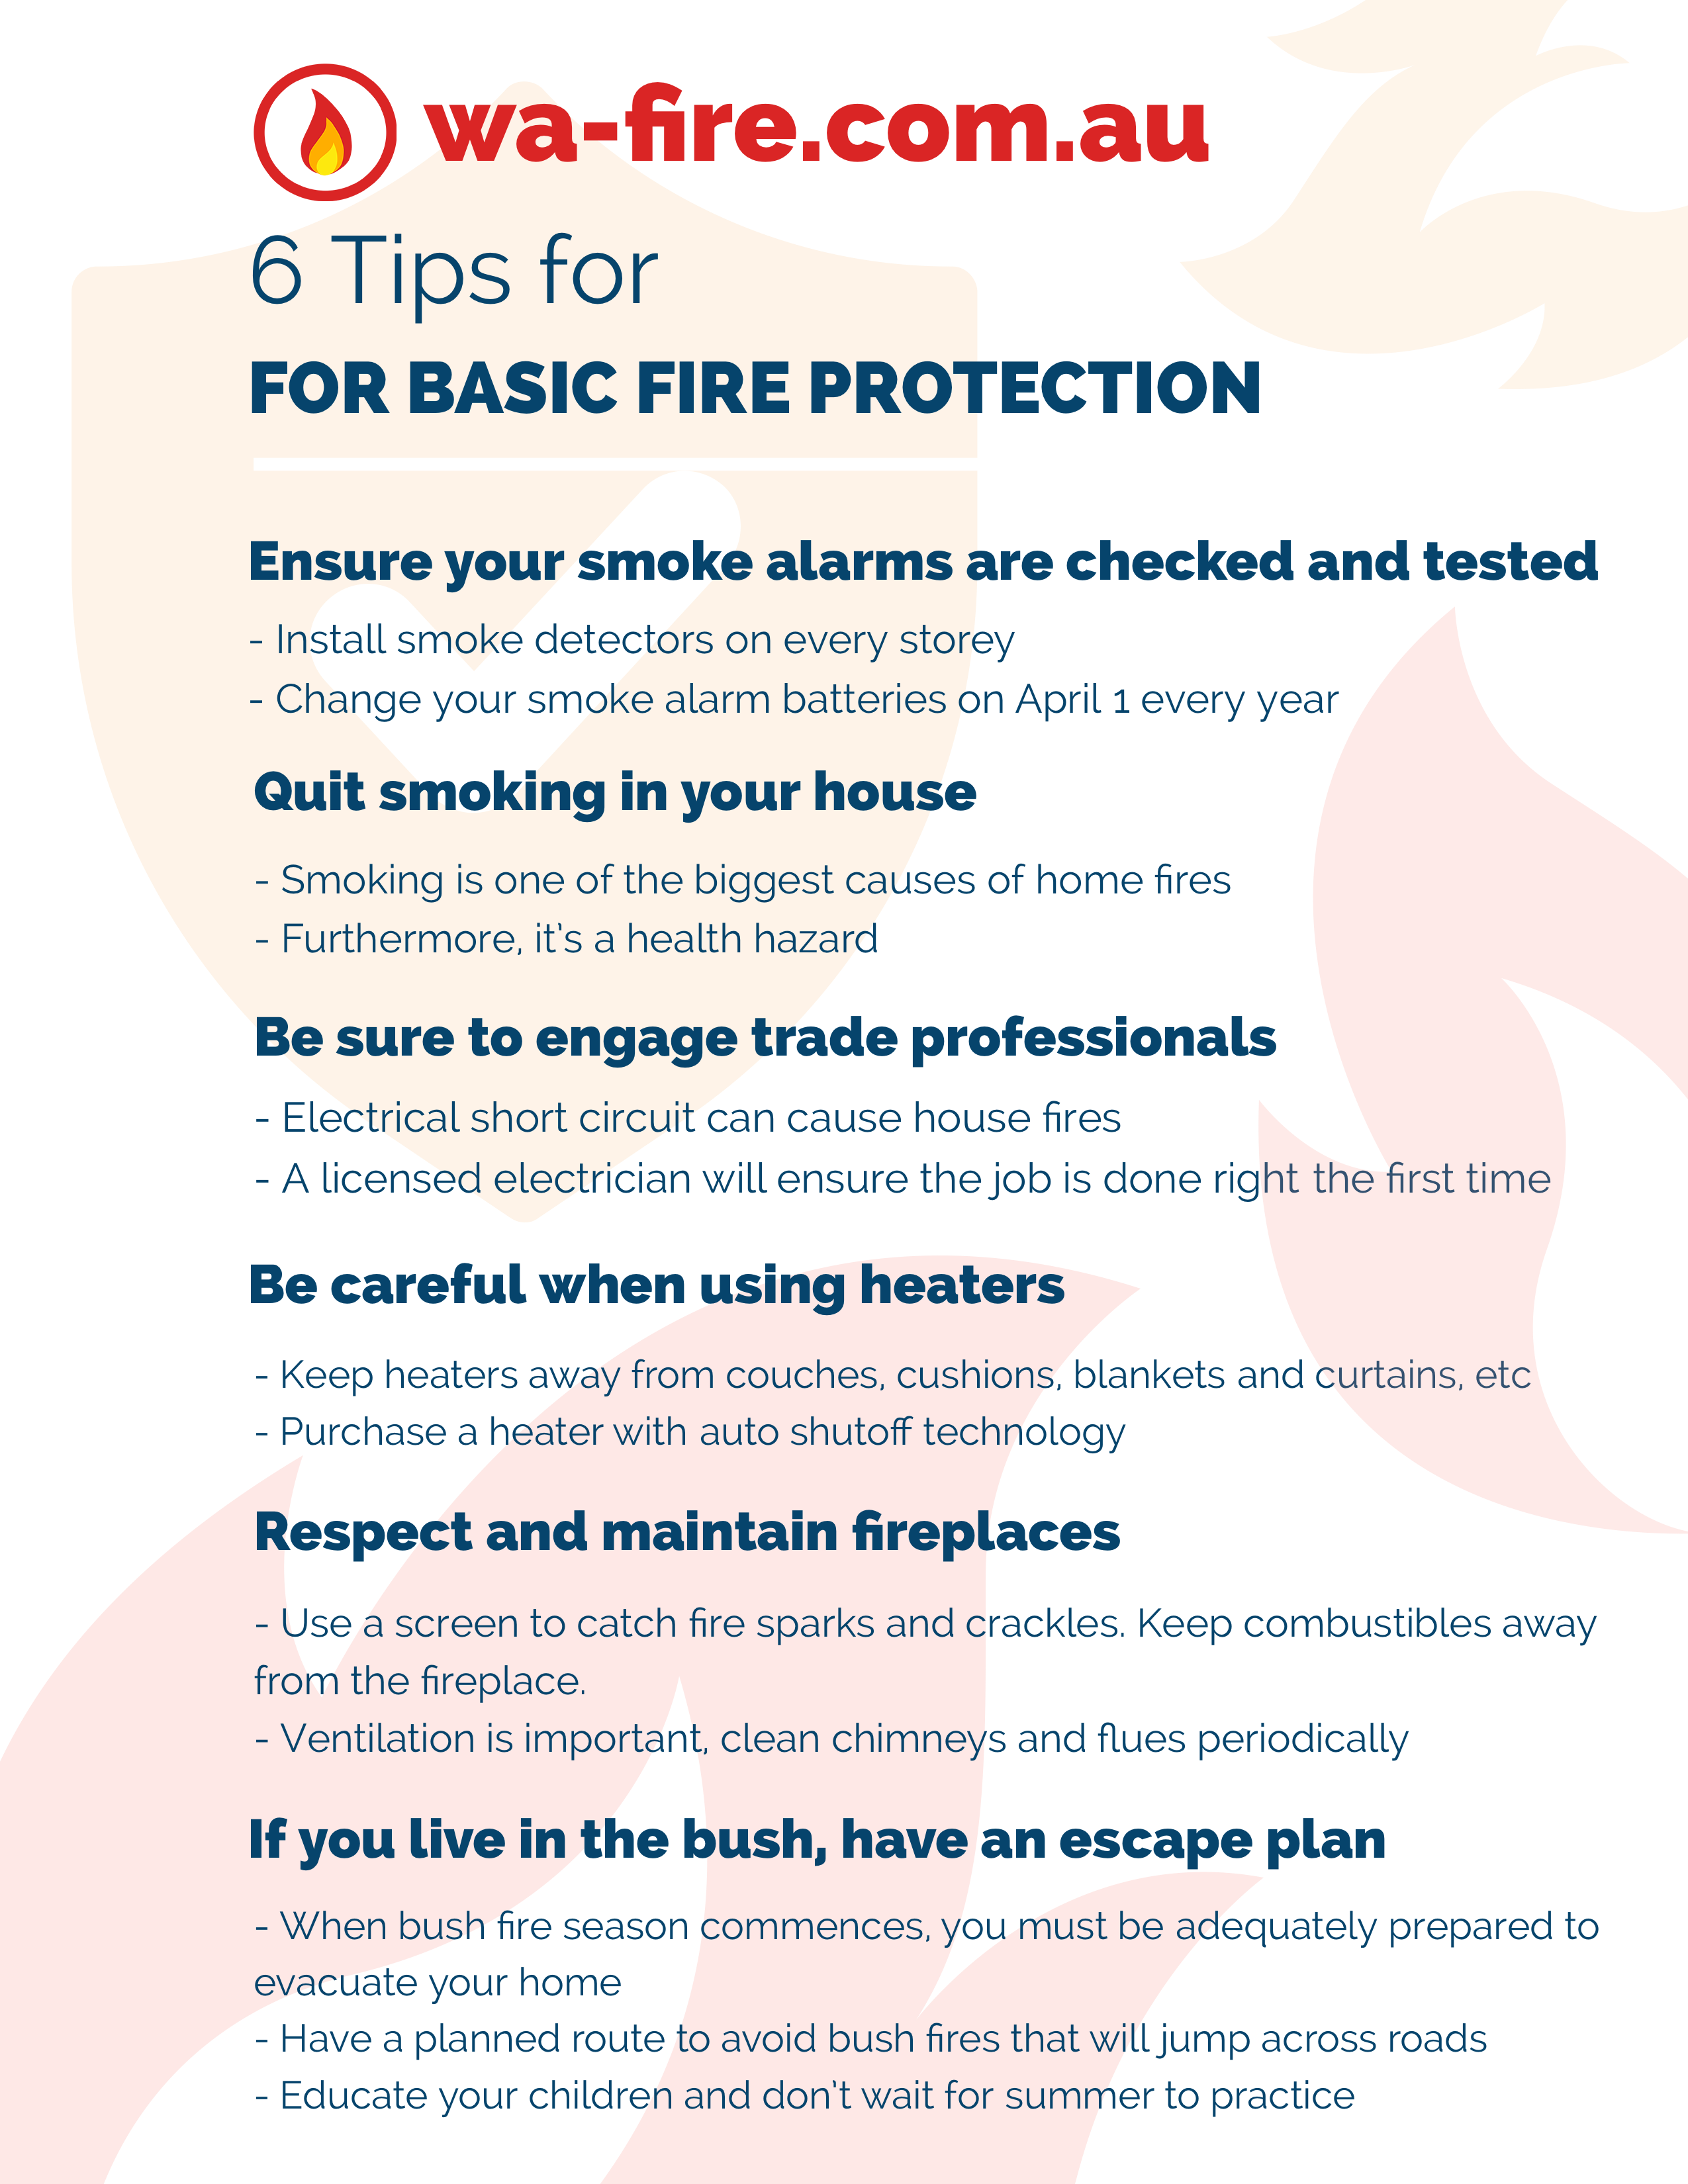 6 tips for basic fire protection | WA Fire